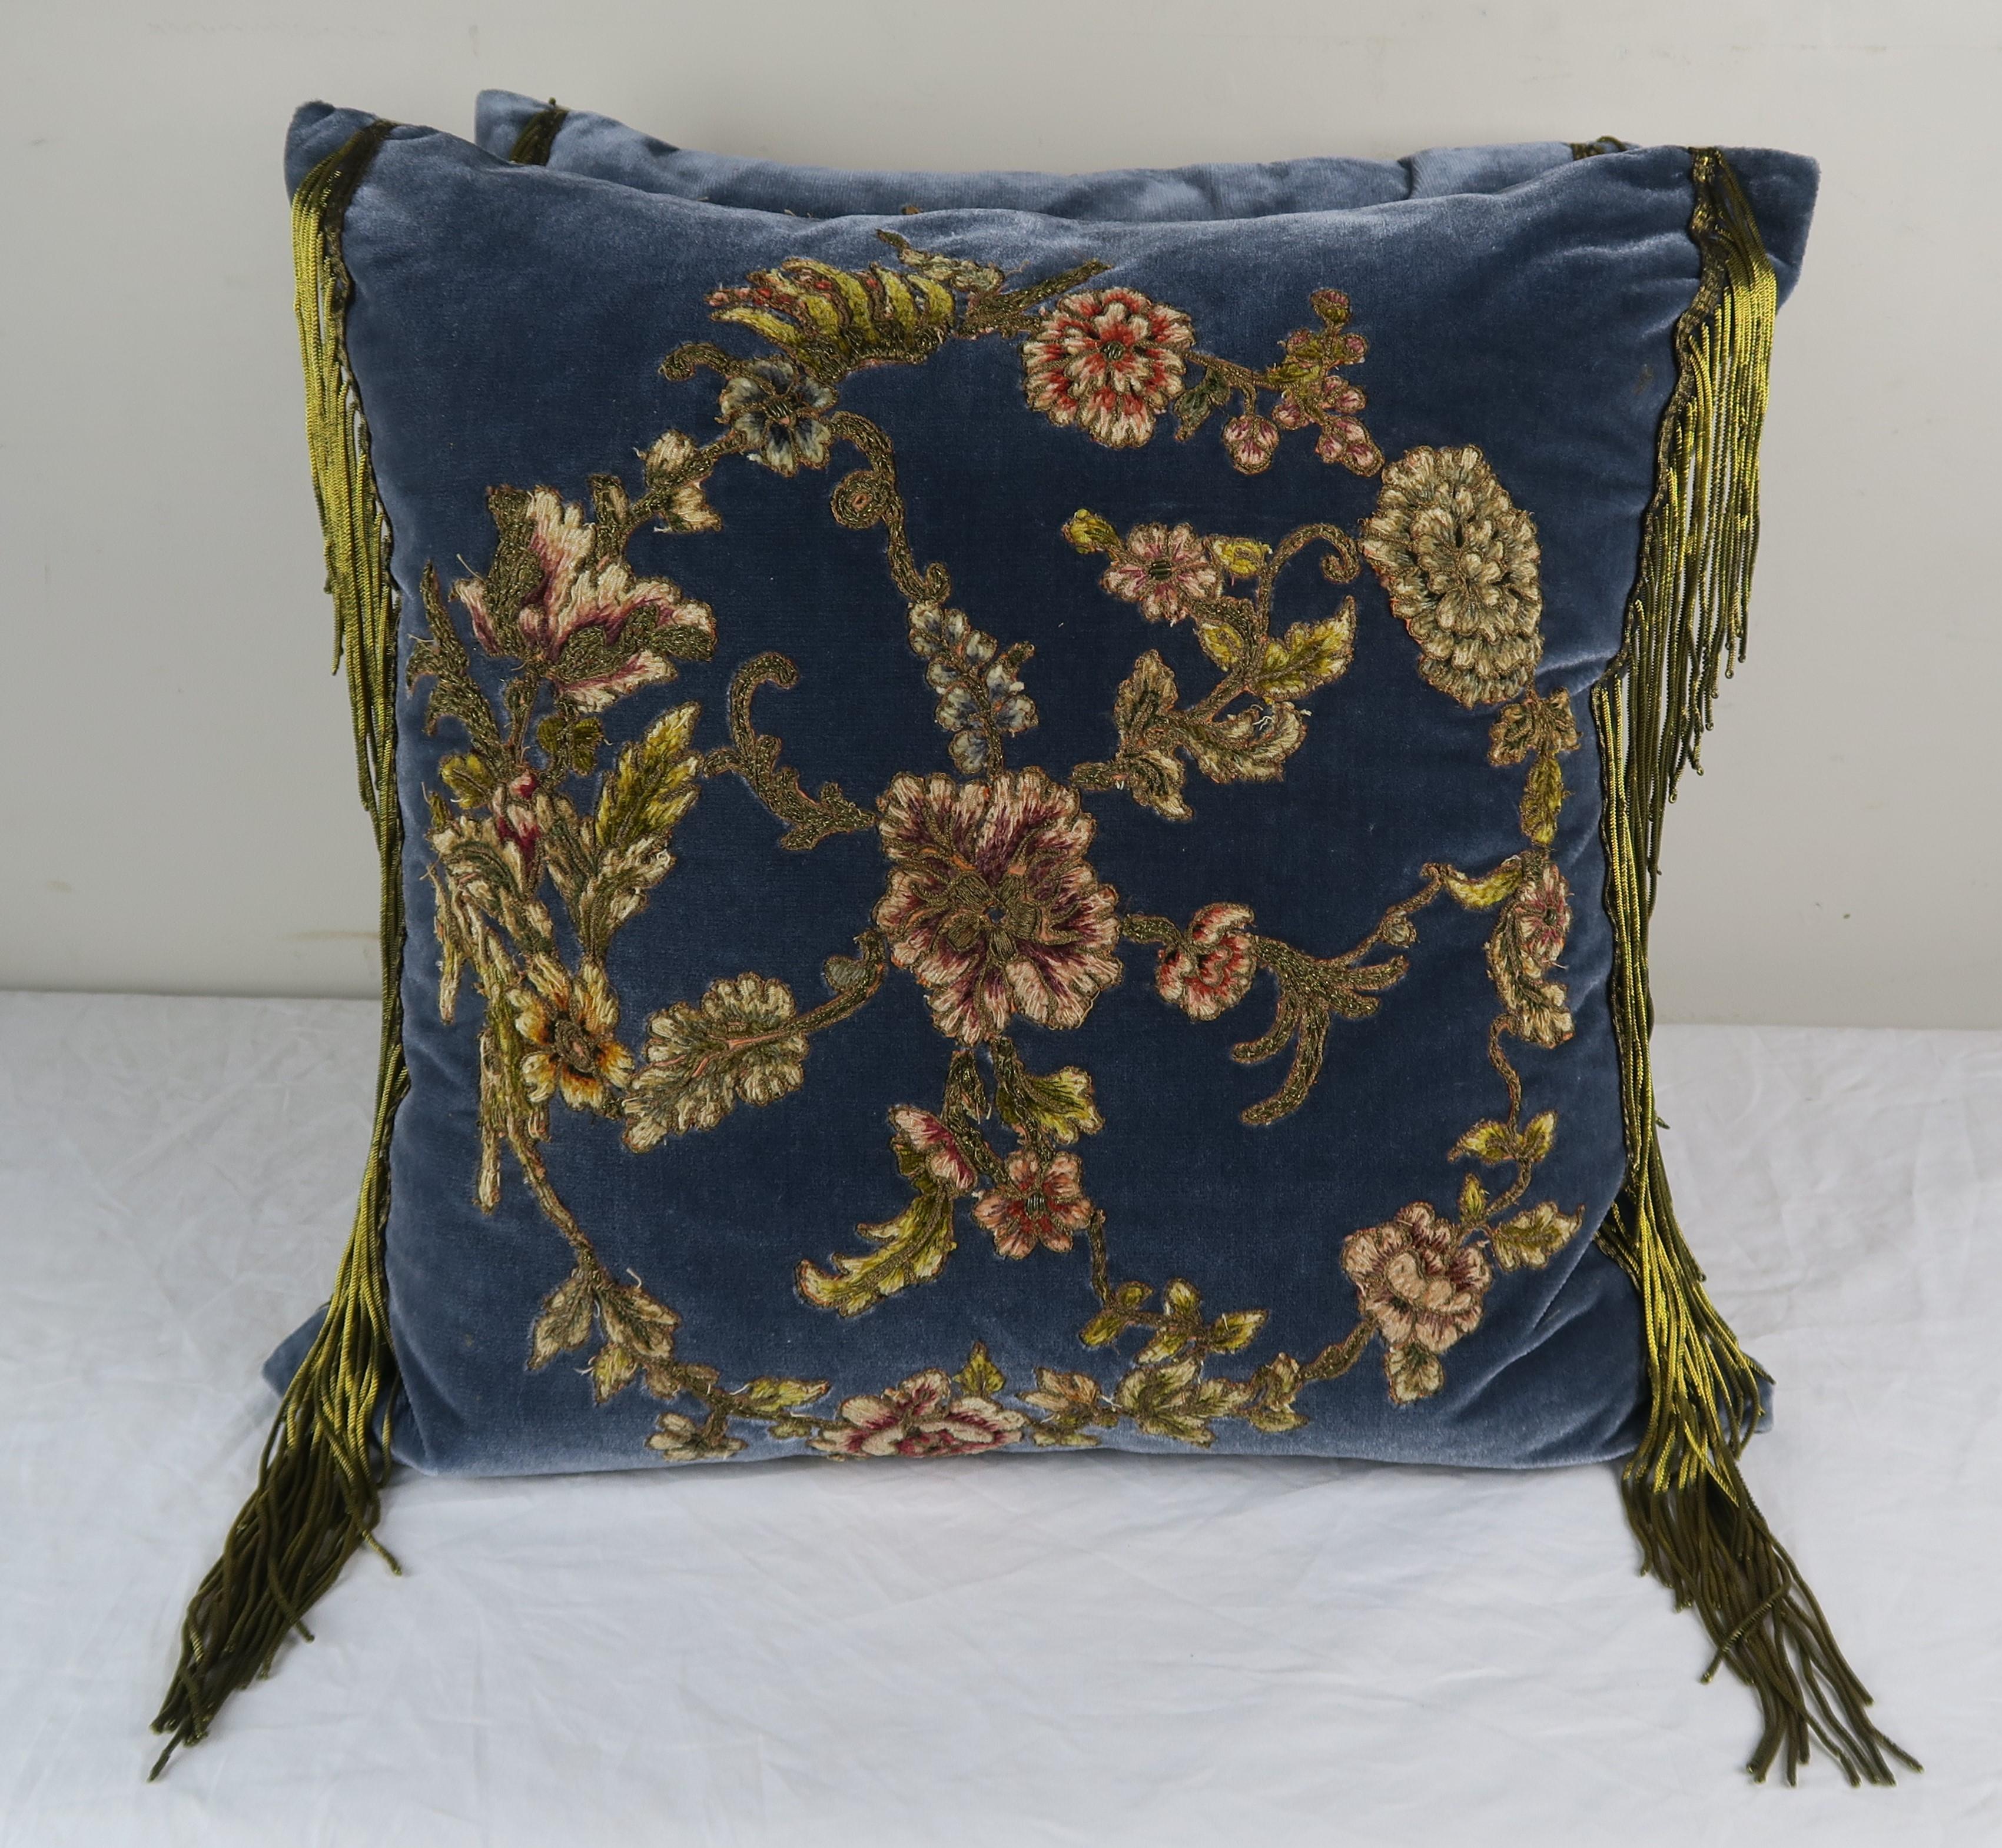 Pair of custom pillows designed by Melissa Levinson made with 19th century handmade metallic & chenille French embroideries appliqued to a deep blue silk velvet background. The embroideries depict pomegranites, roses, peonies, daisies and so much